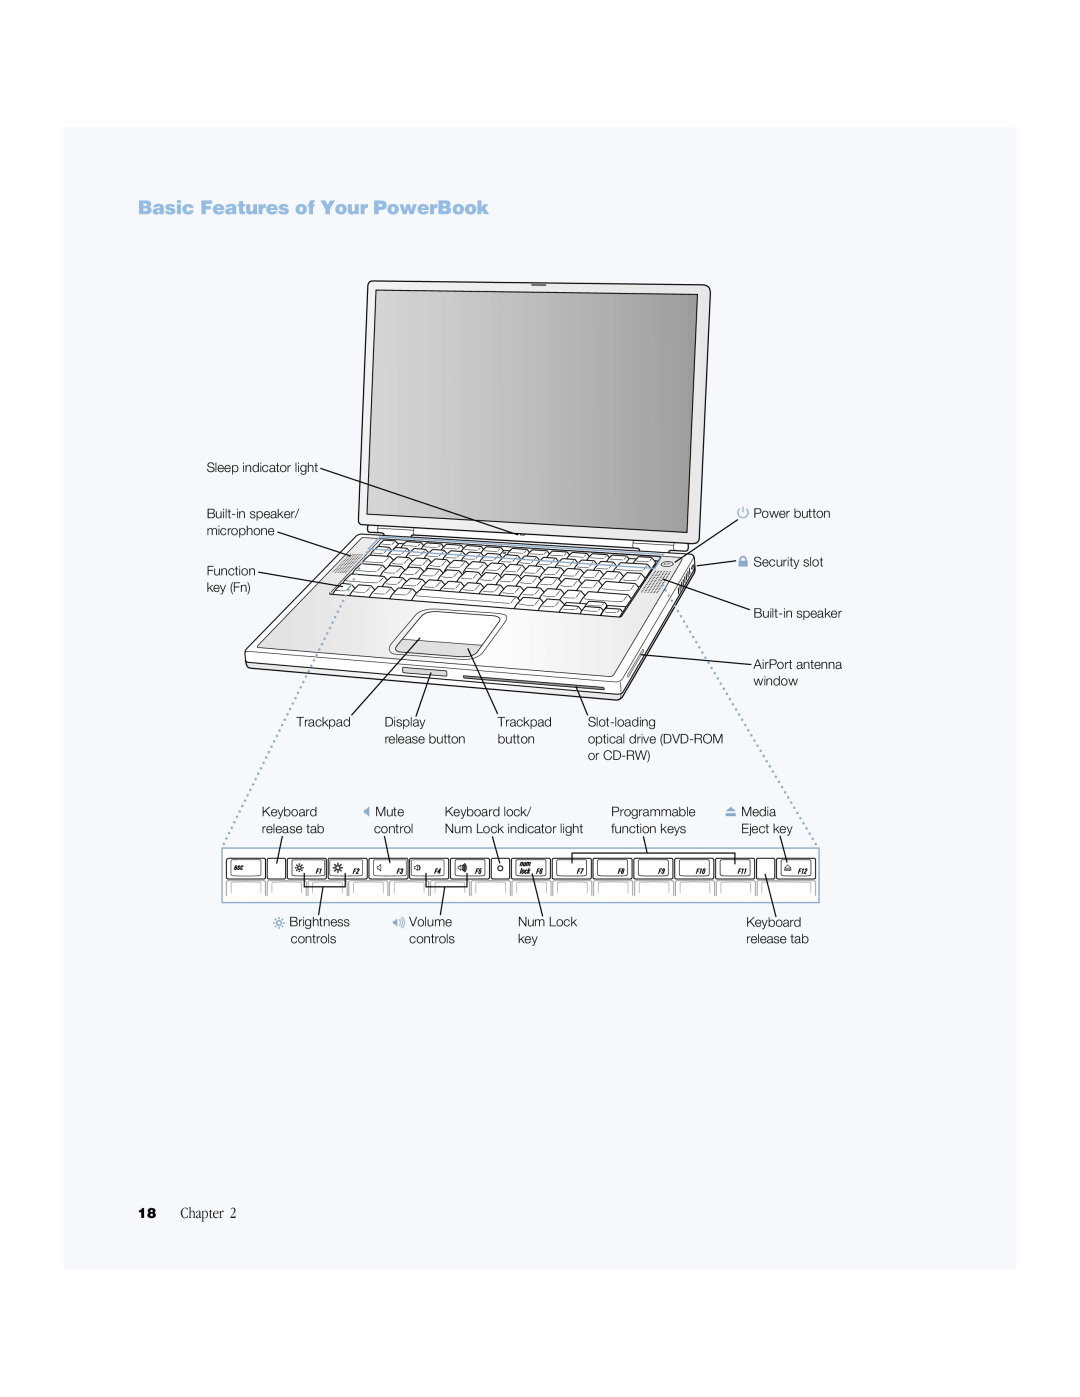 Apple powerbook g4 manual Basic Features of Your PowerBook, Chapter 